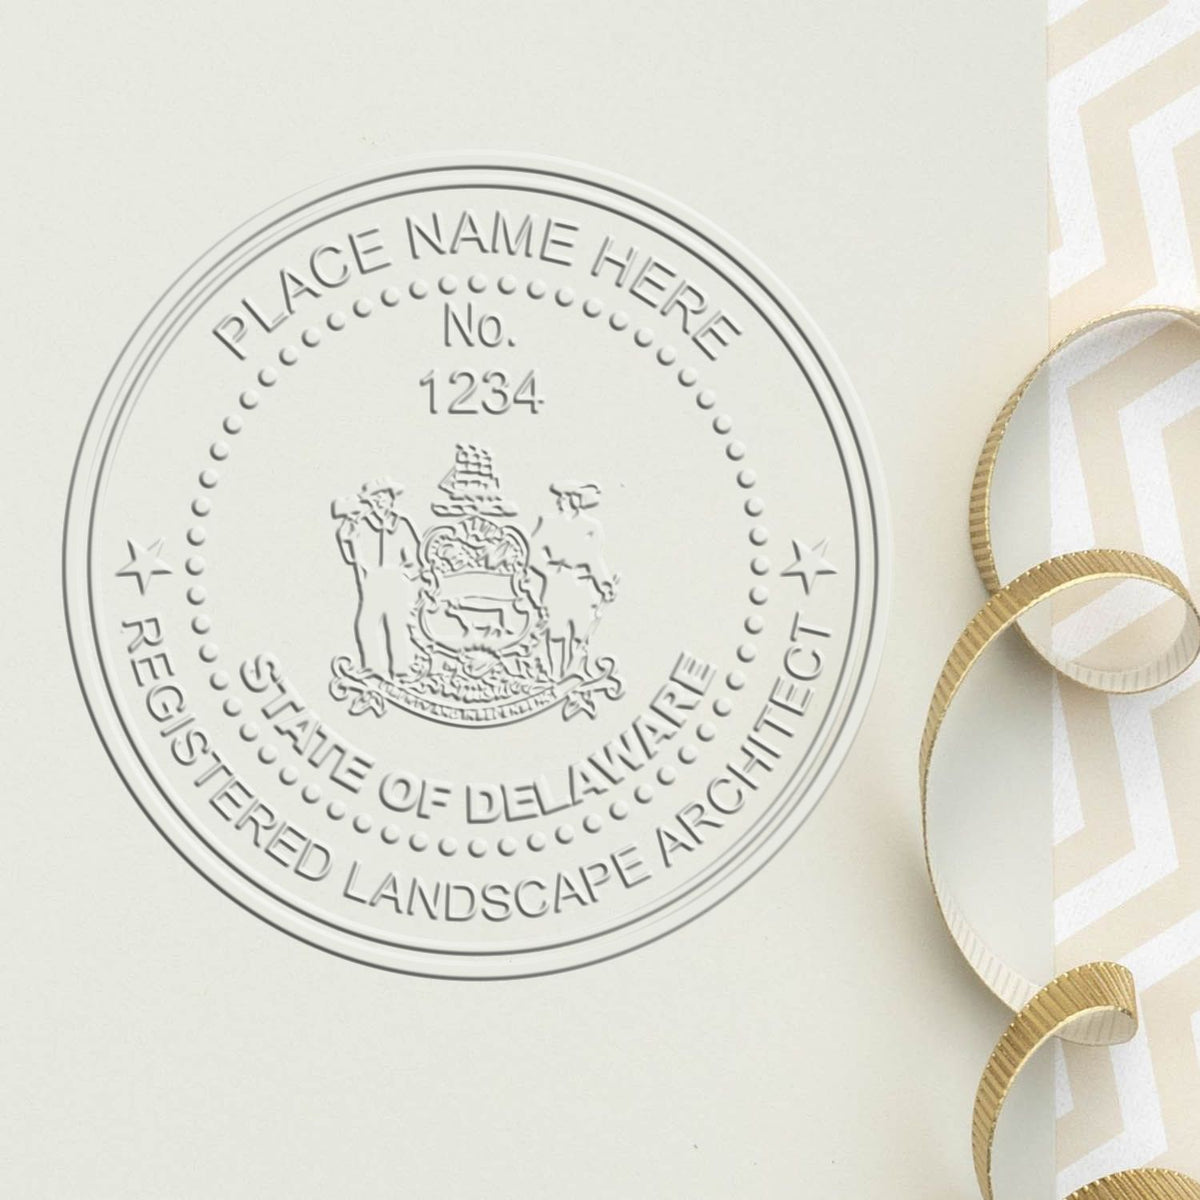 A photograph of the Hybrid Delaware Landscape Architect Seal stamp impression reveals a vivid, professional image of the on paper.